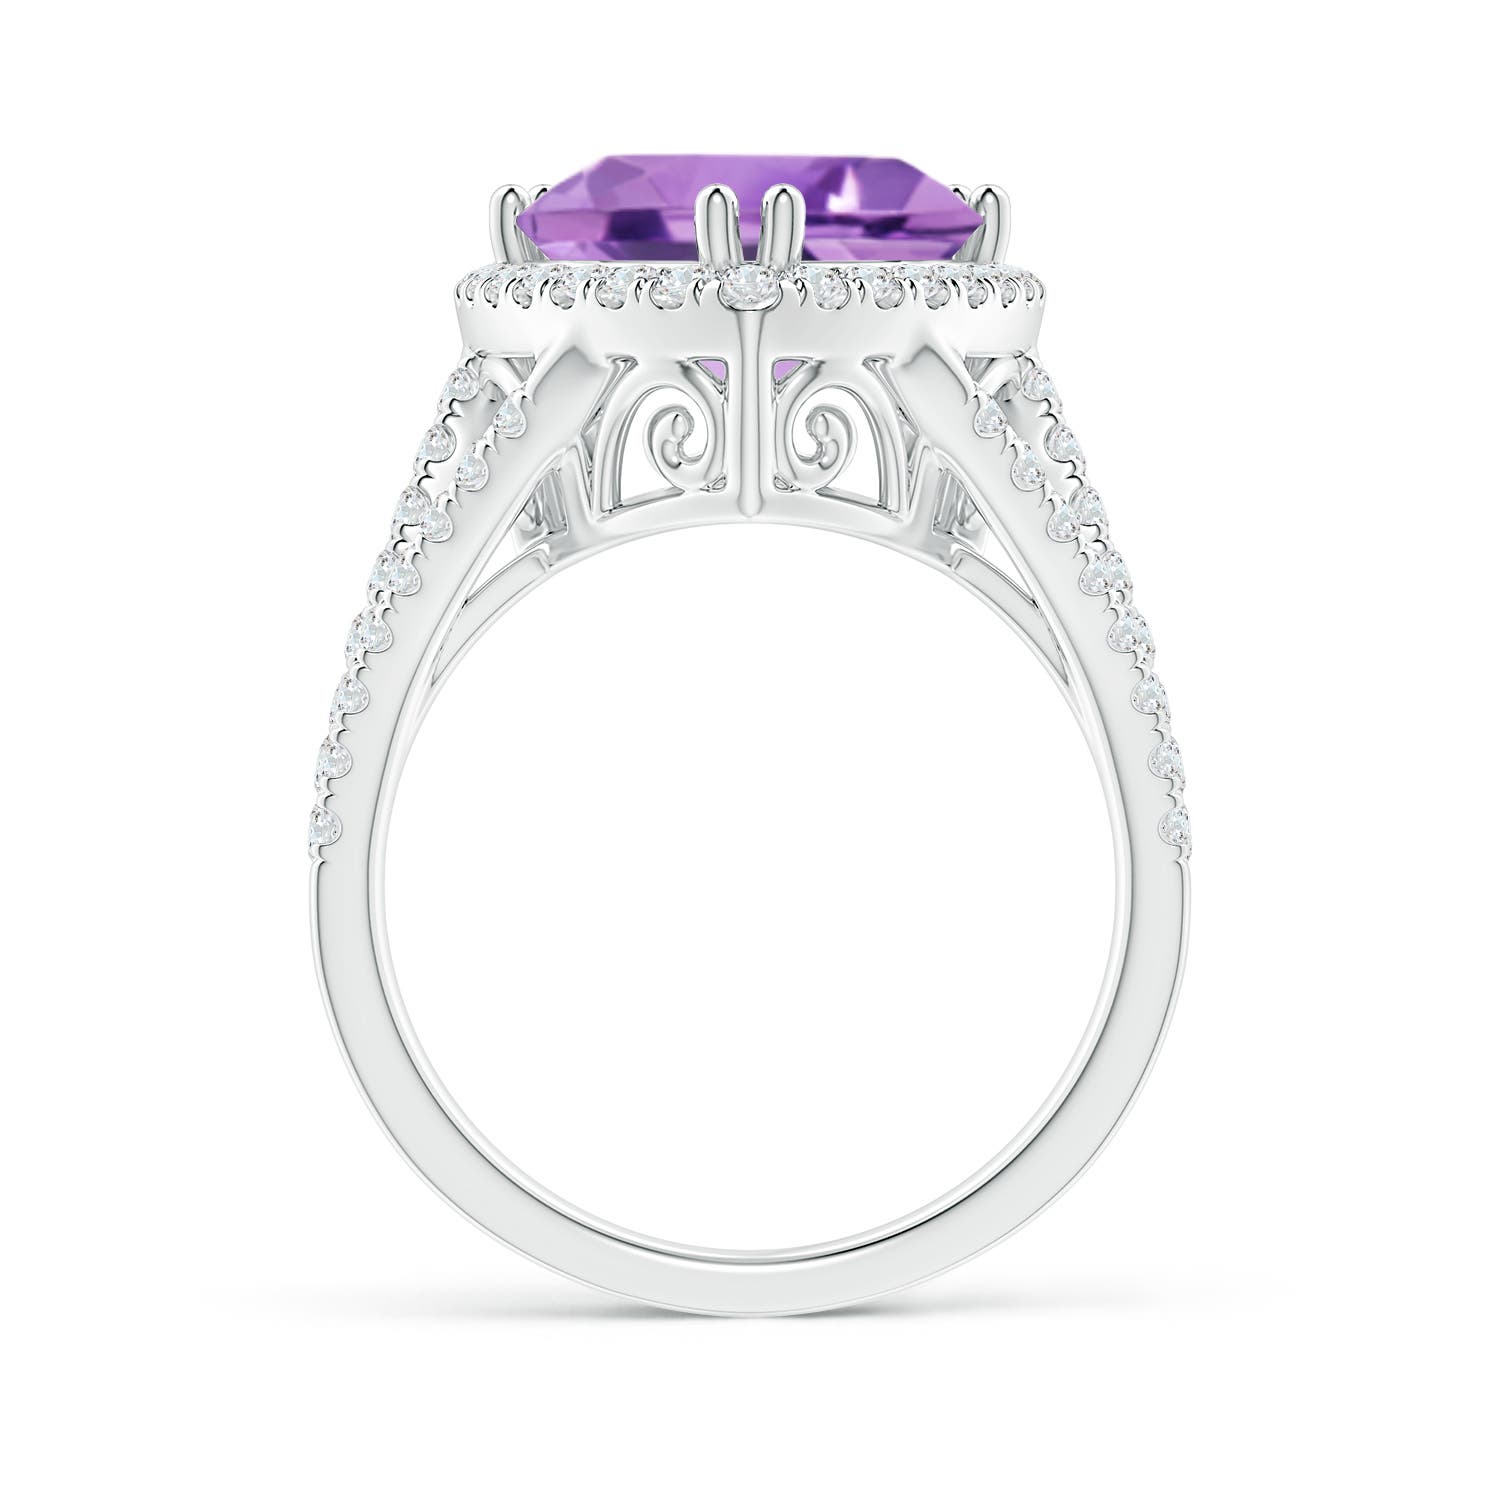 A - Amethyst / 4.47 CT / 14 KT White Gold